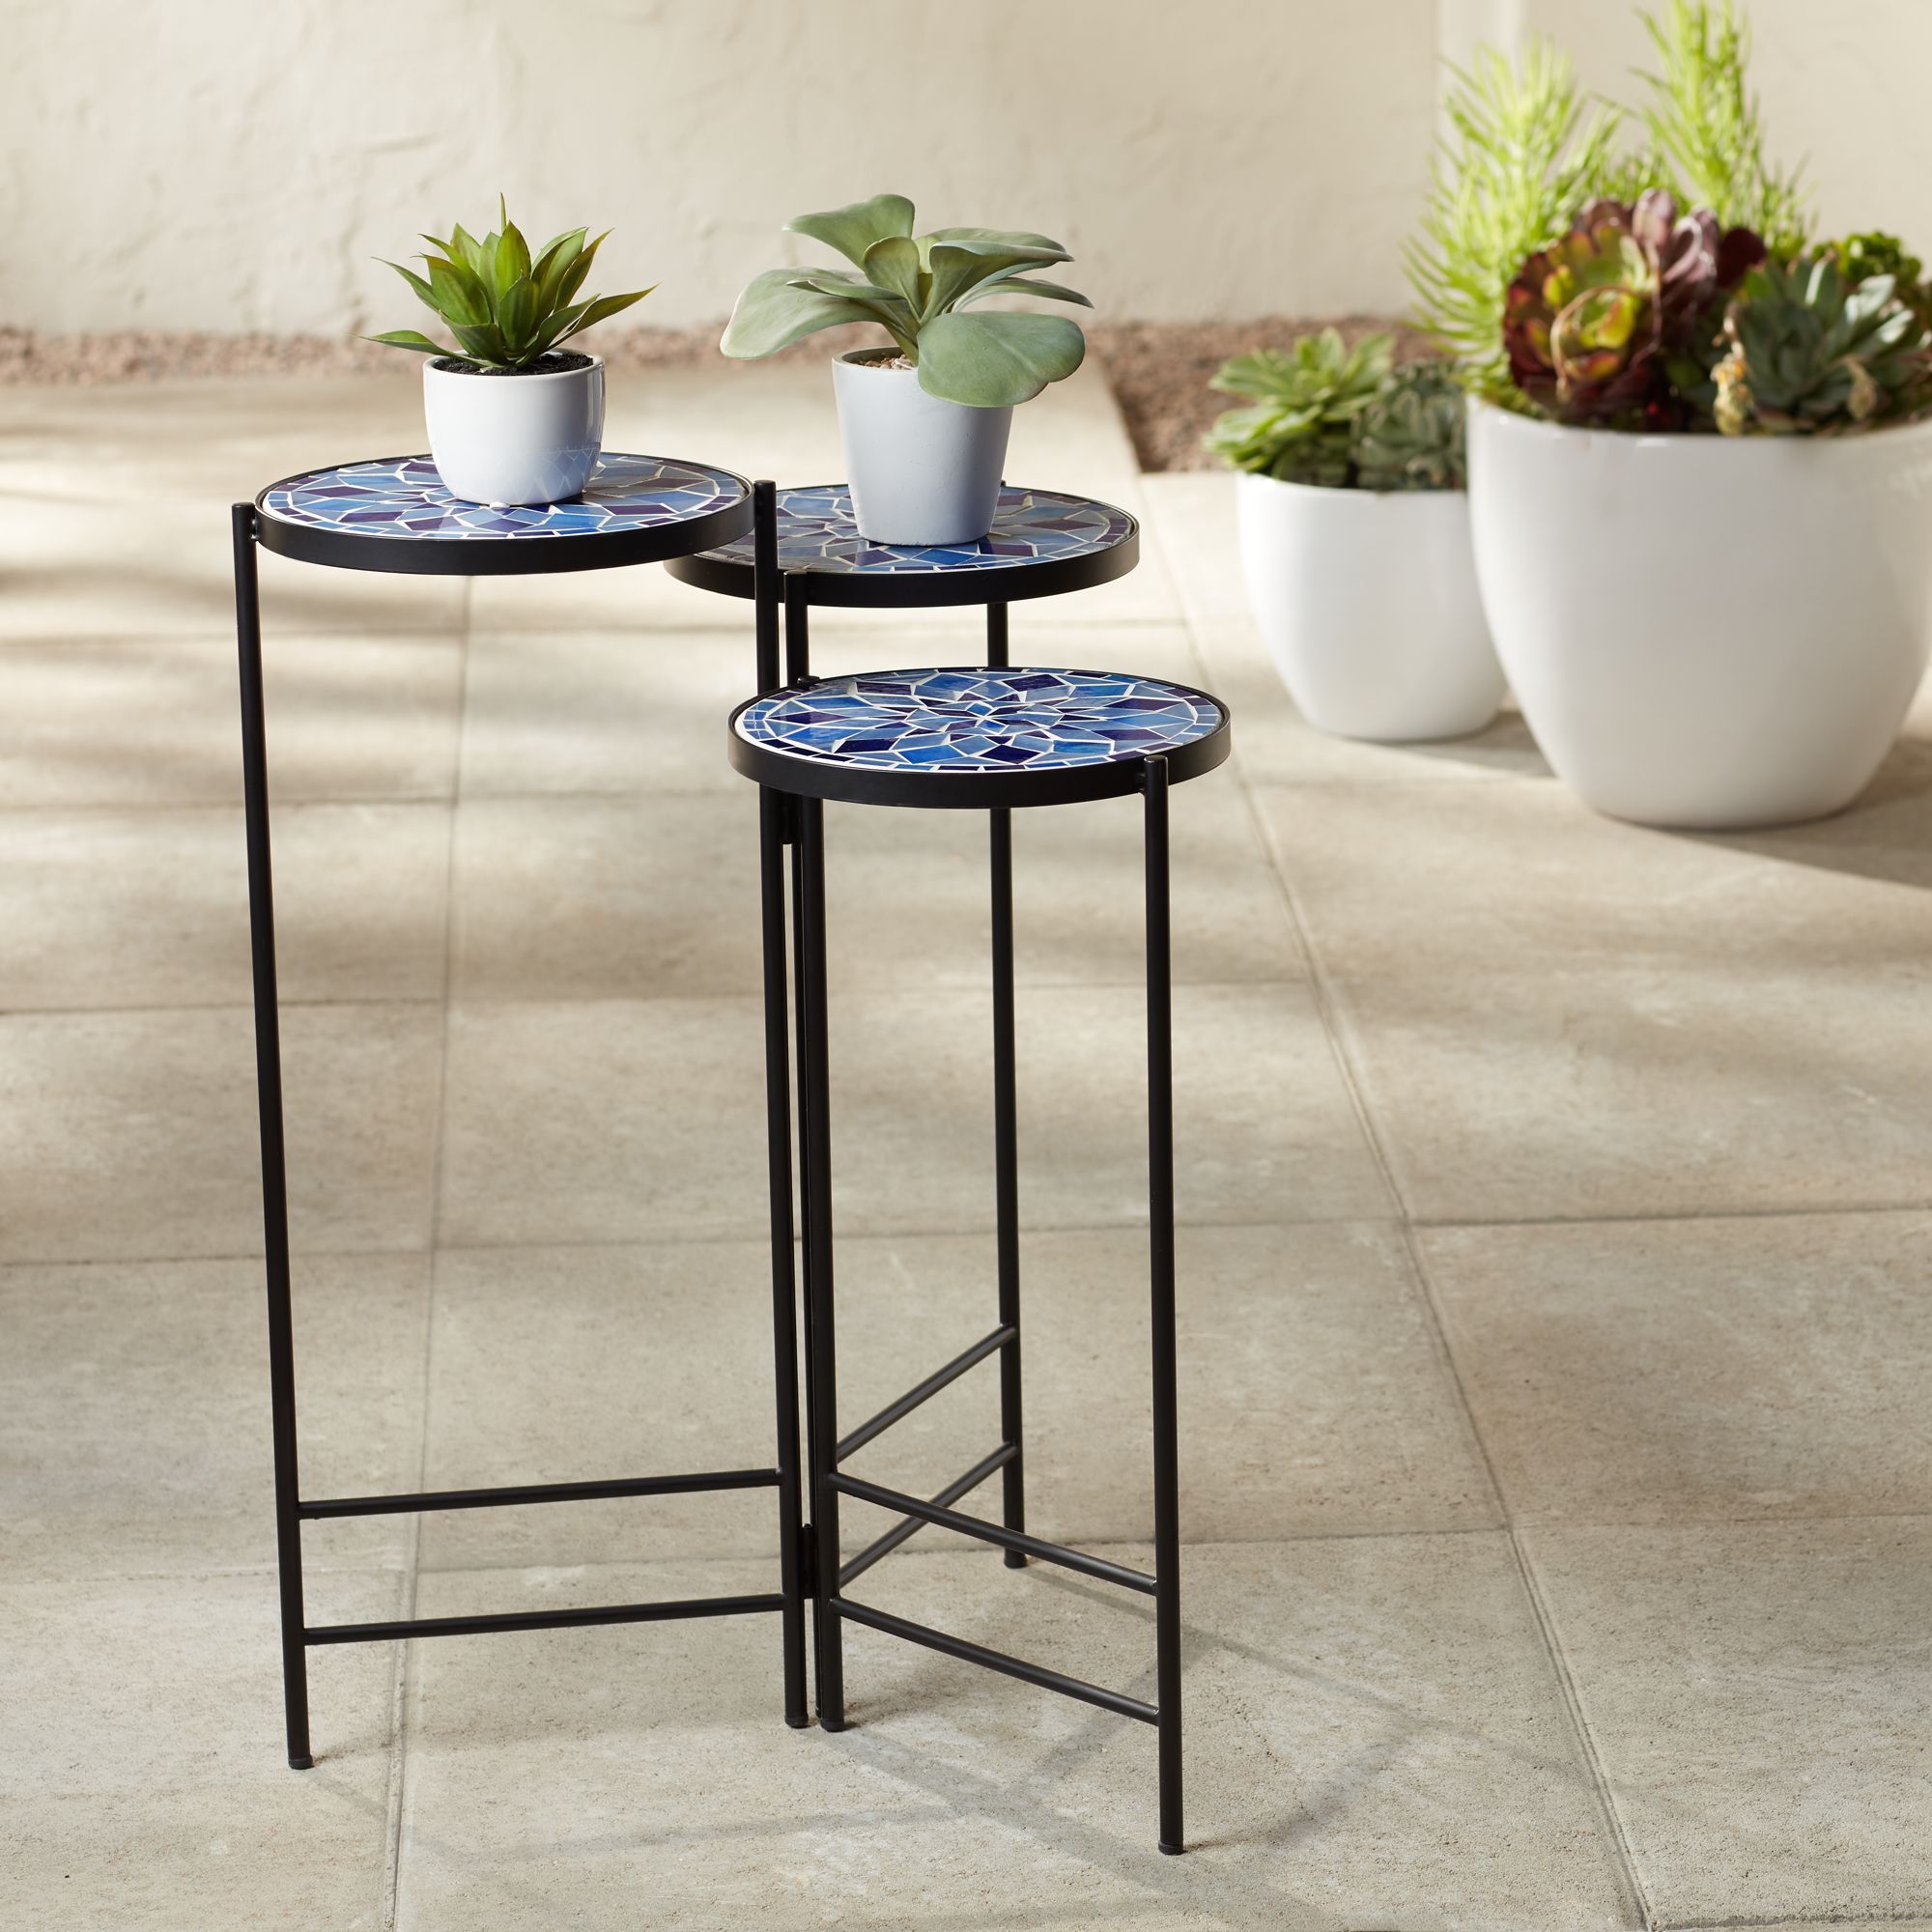 Teal Island Designs Blue Mosaic Black Iron Set Of 3 Accent Tables Within Mosaic Black Iron Outdoor Accent Tables (View 9 of 15)